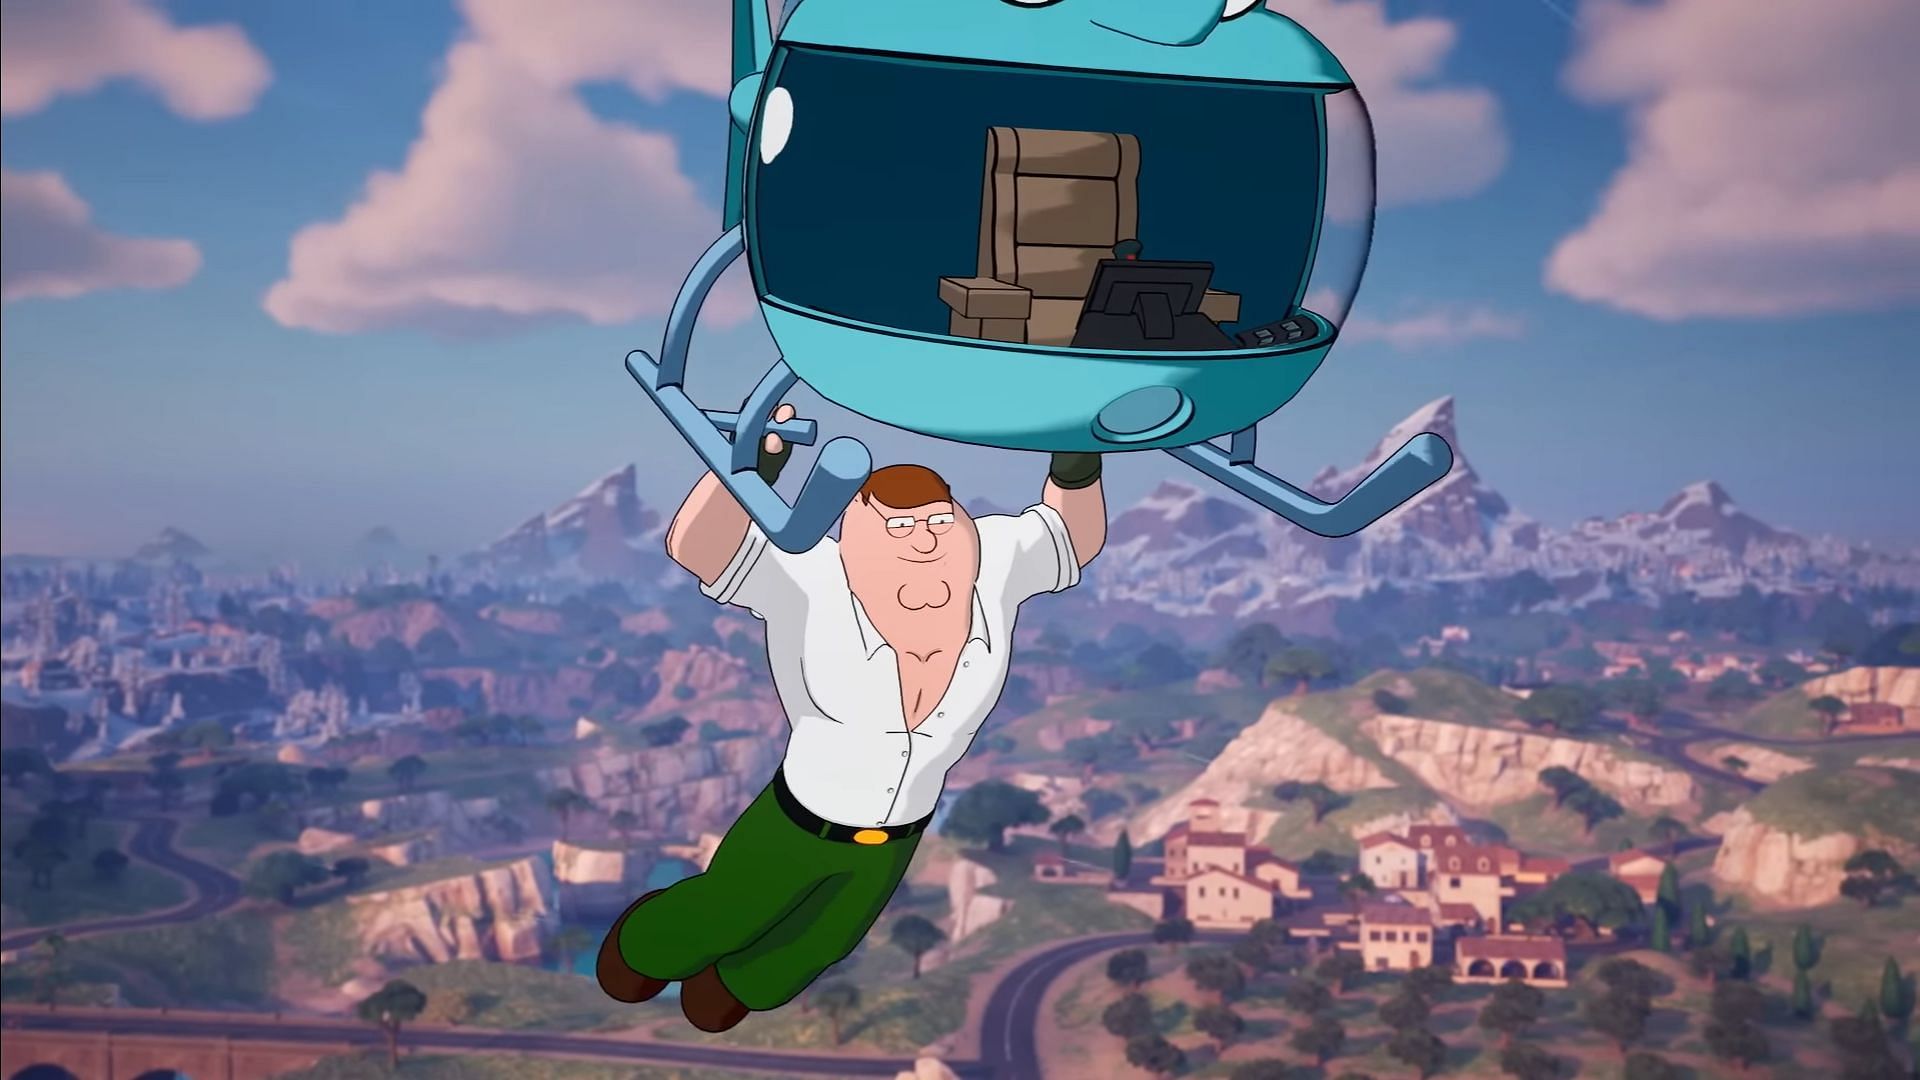 How to get Peter Griffin skin in Fortnite